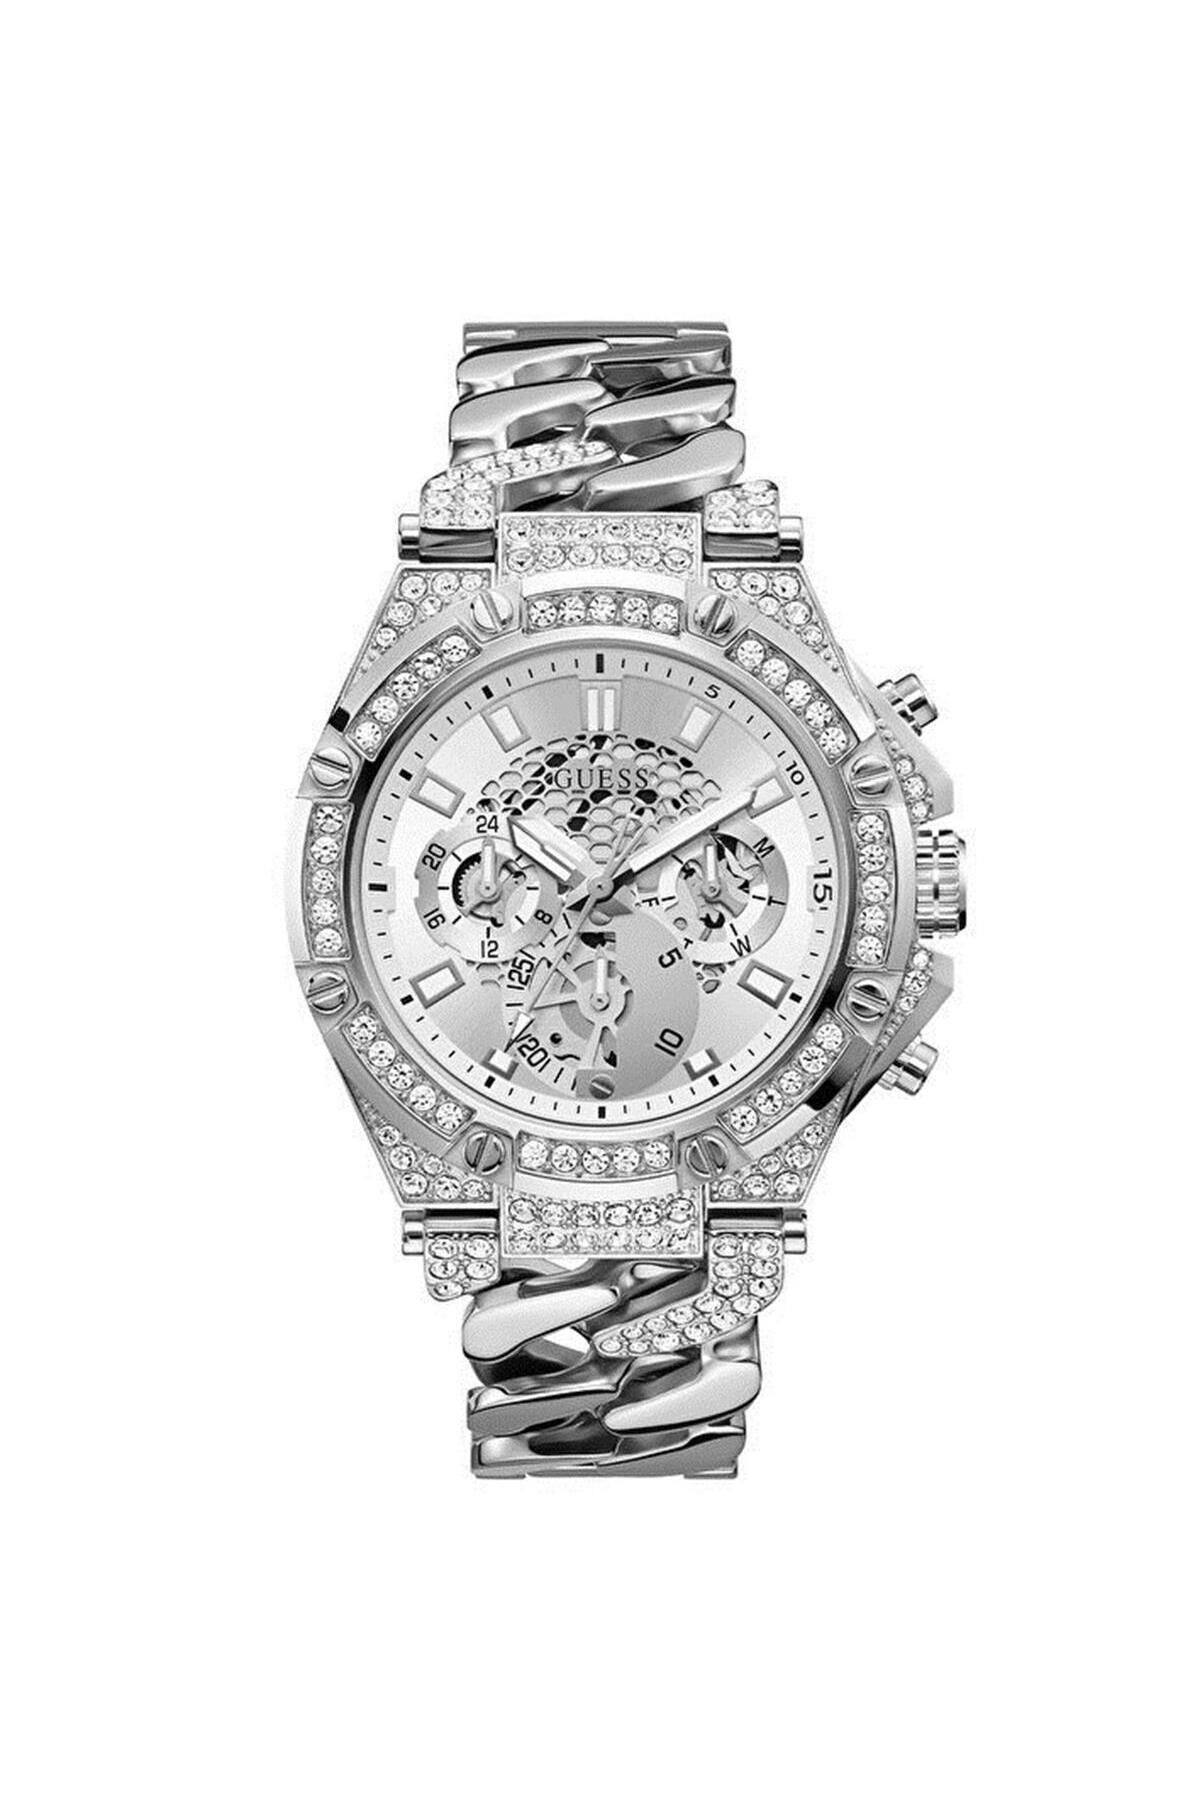 Guess Gugw0517g1